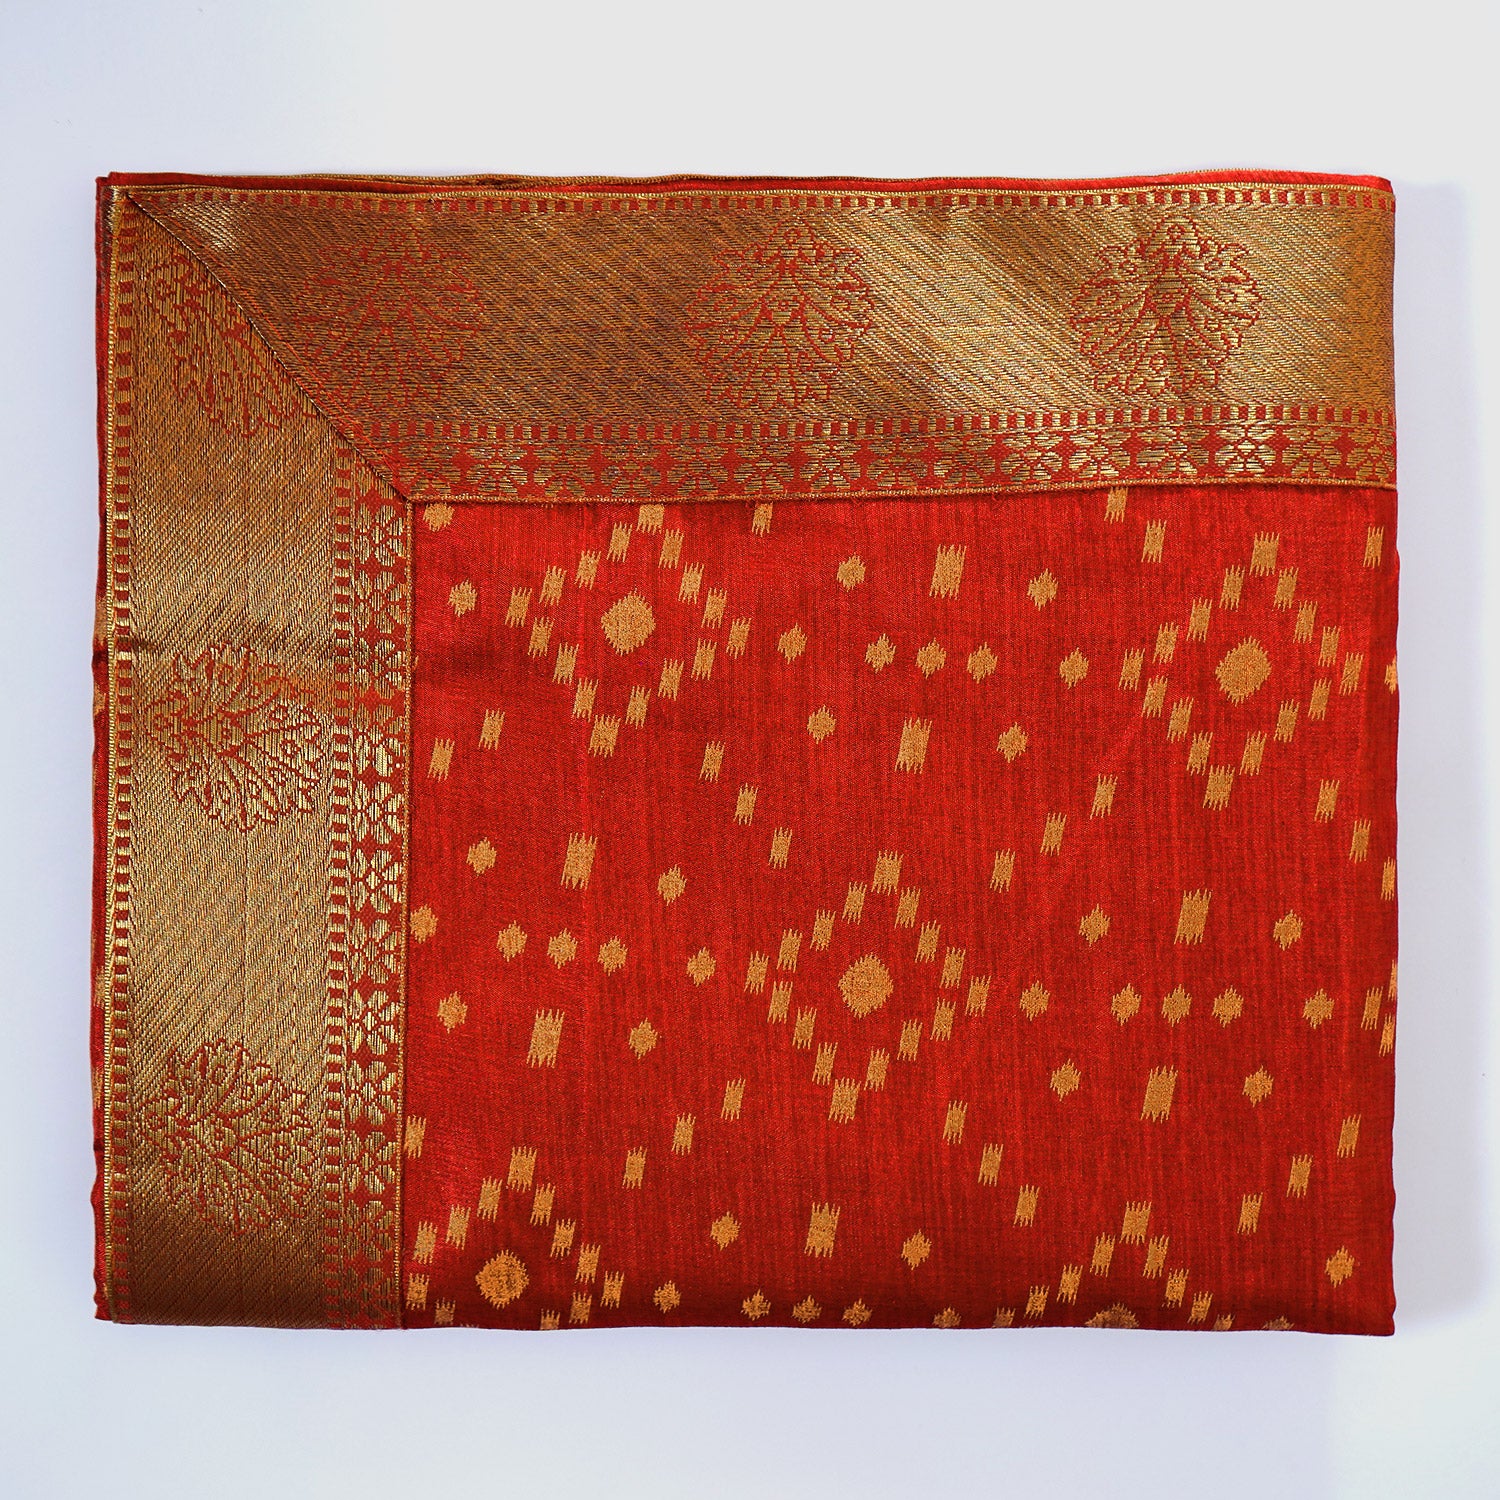 Red Bandhani Silk Saree, Golden Border Traditional Saree, Indian Ethnic Wear, Bloomaya Sarees Online, Premium Silk Saree, Festive Occasion Attire, Classic Indian Wedding Outfit, Elegant Ethnic Fashion, Cultural Heritage Clothing, Red and Gold Silk Saree.